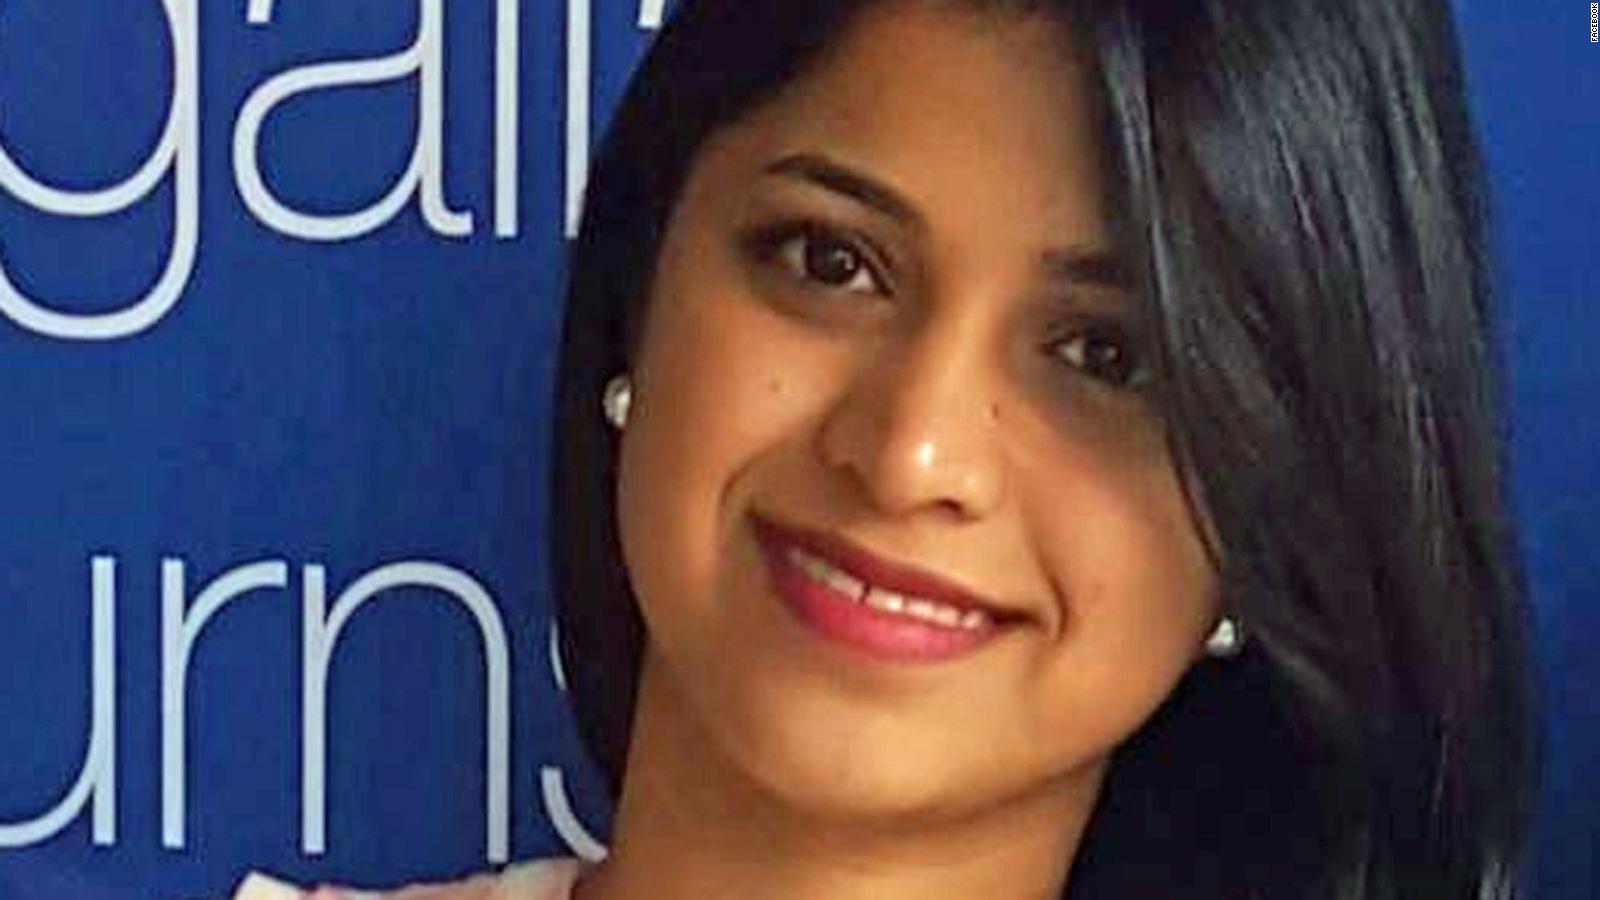 preethi 32 lives in mississauga ontario